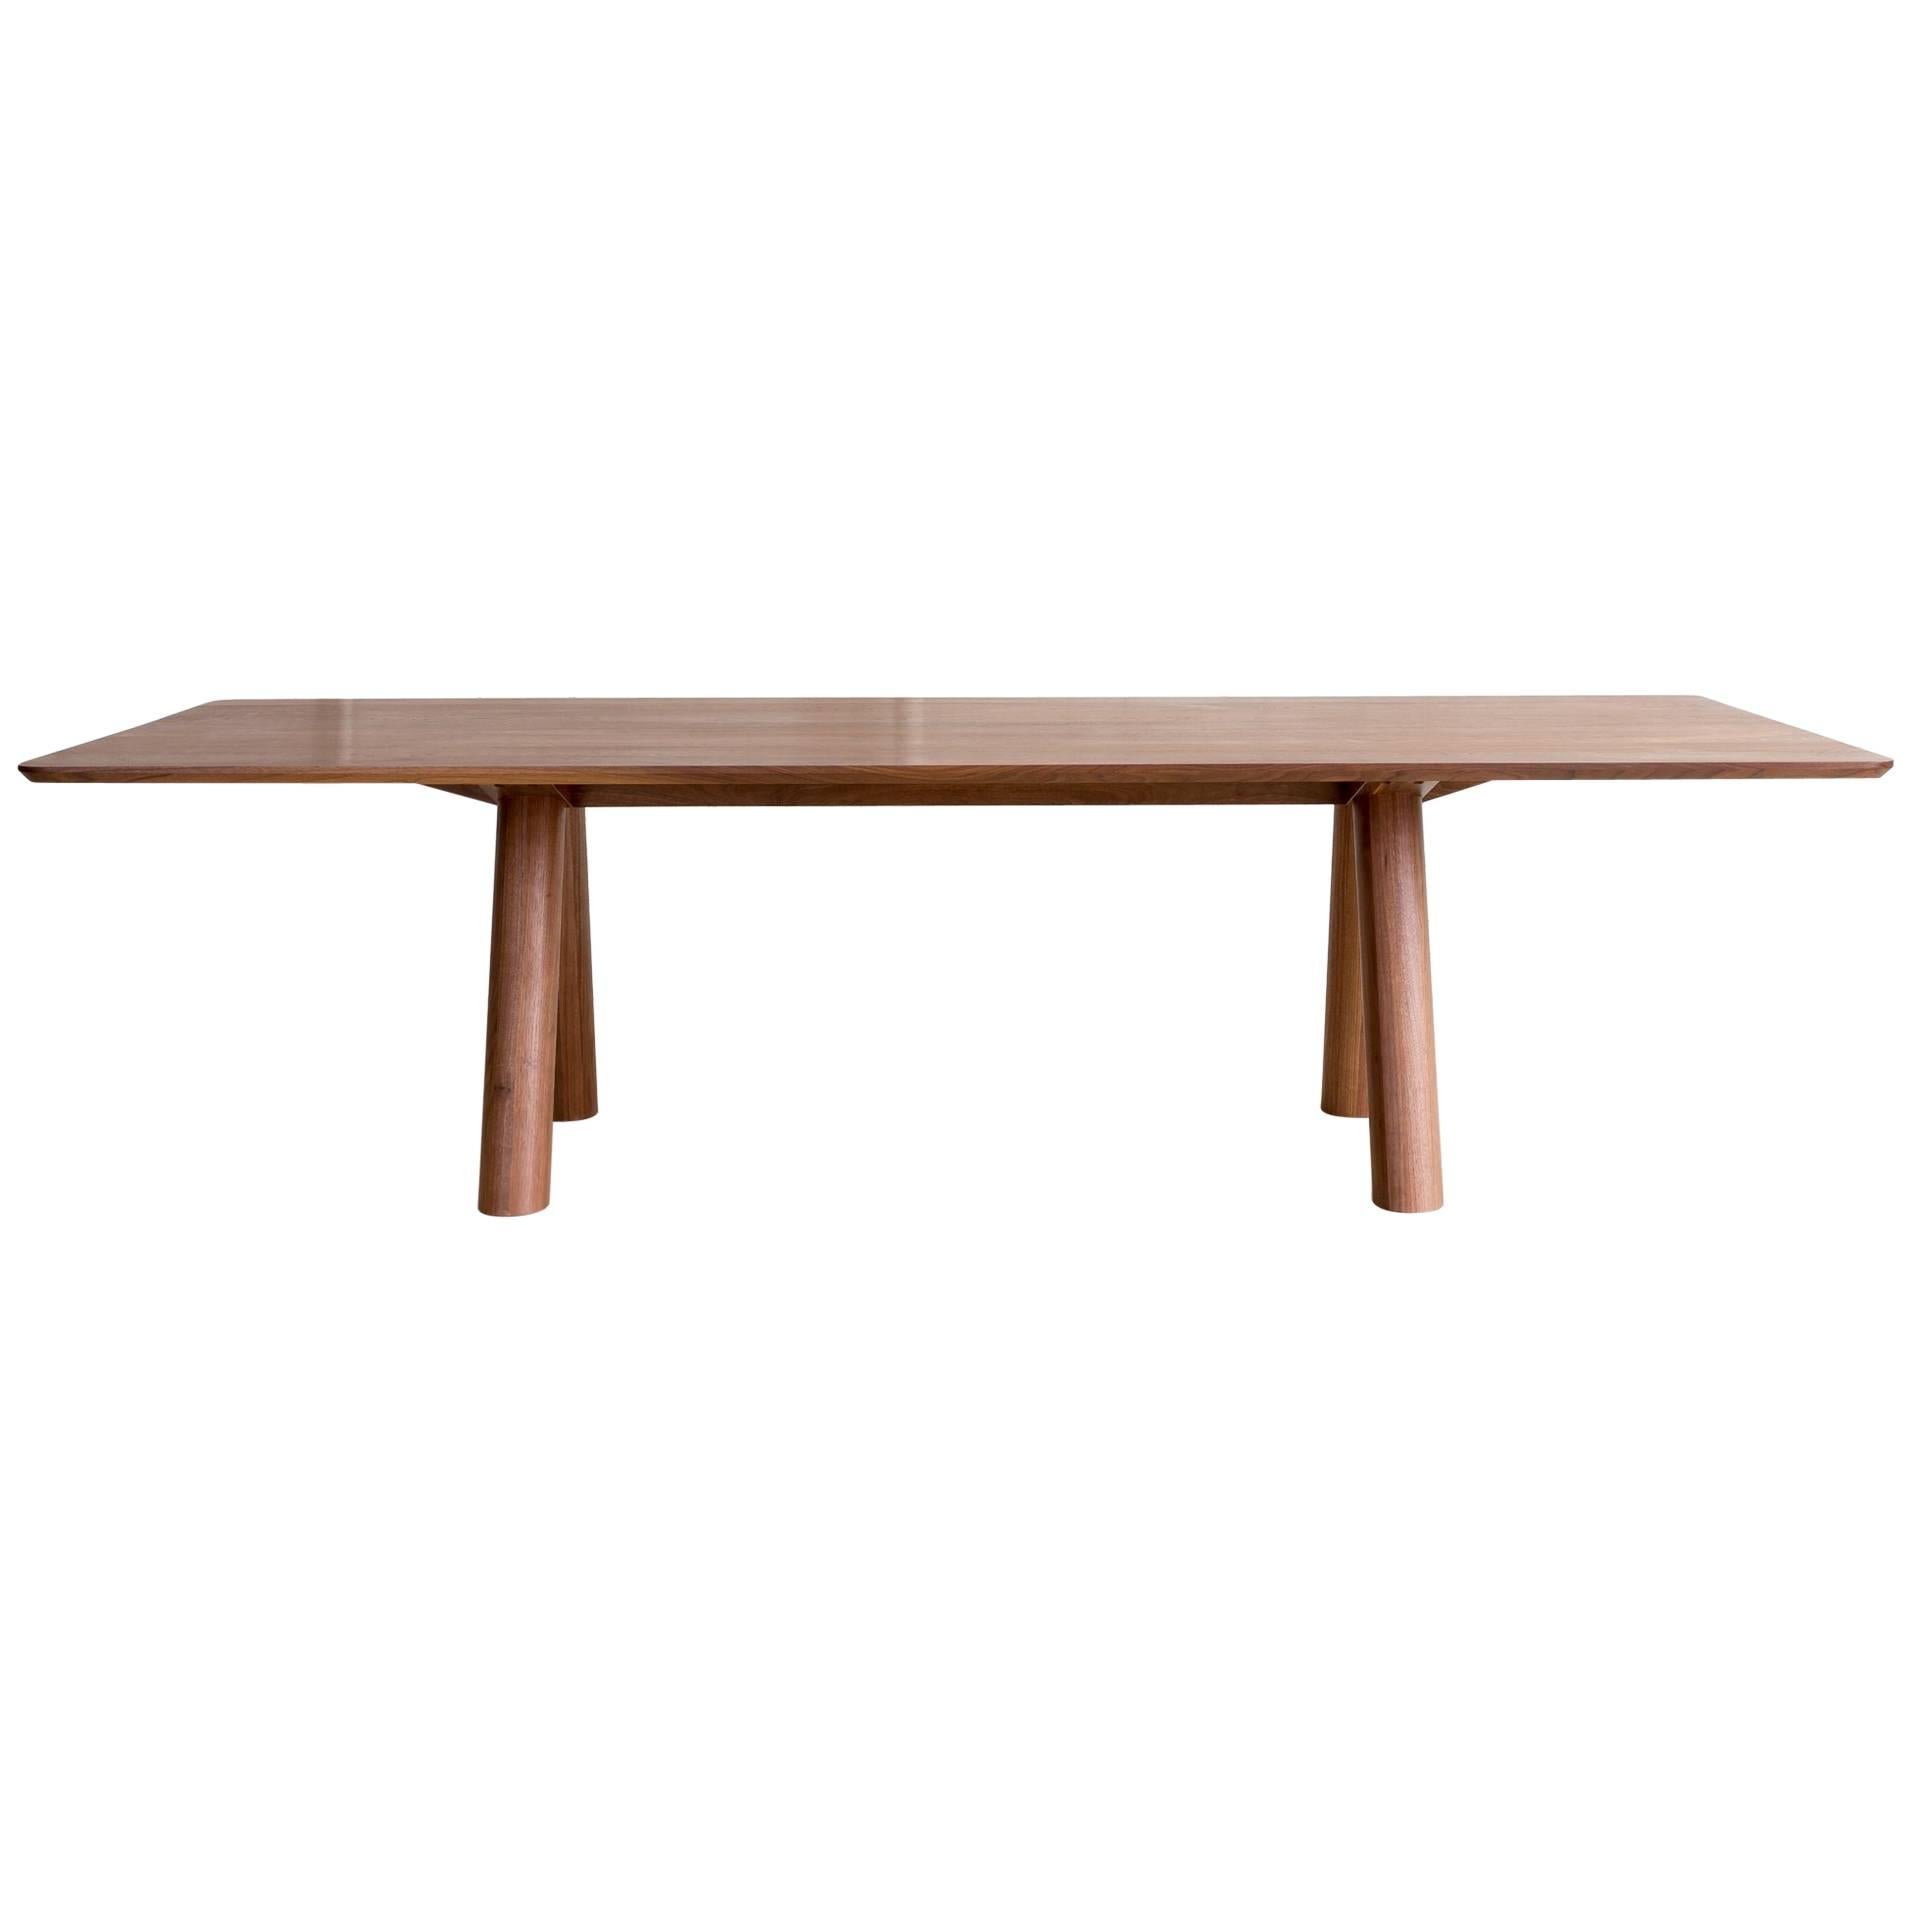 Contemporary Angled Leg Column Dining Table in Walnut Wood by Fort Standard